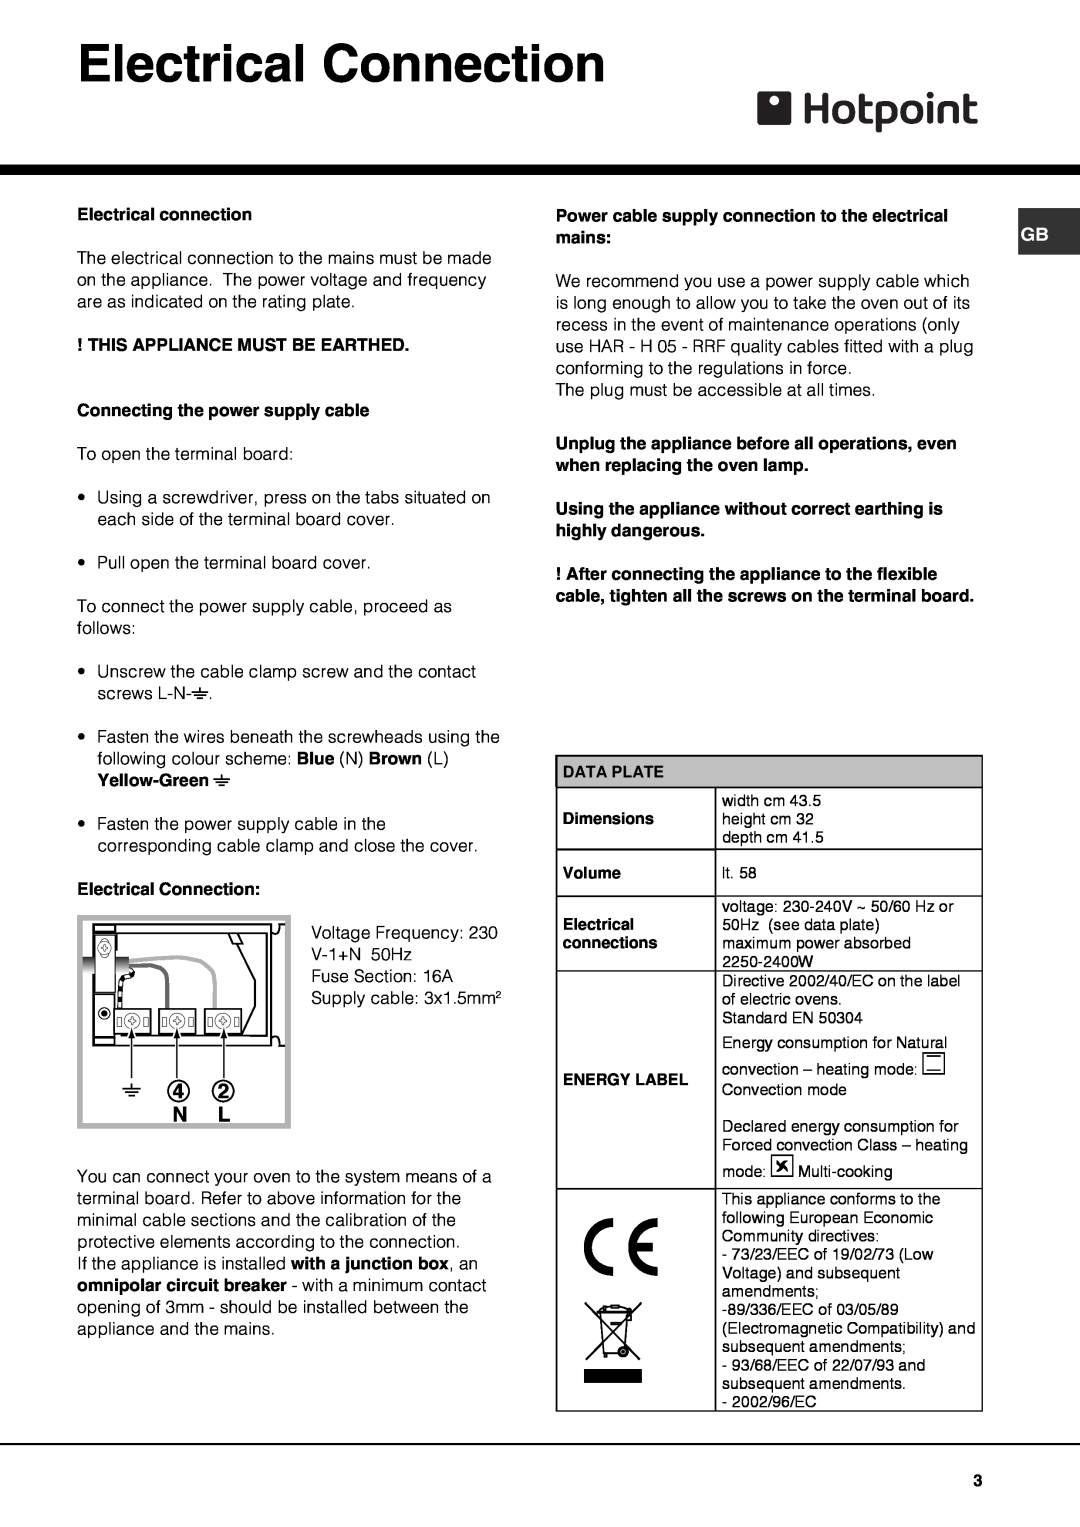 Hotpoint SY56X, X SY51, SY51X, SY10 operating instructions Electrical Connection, 4 2 N L 